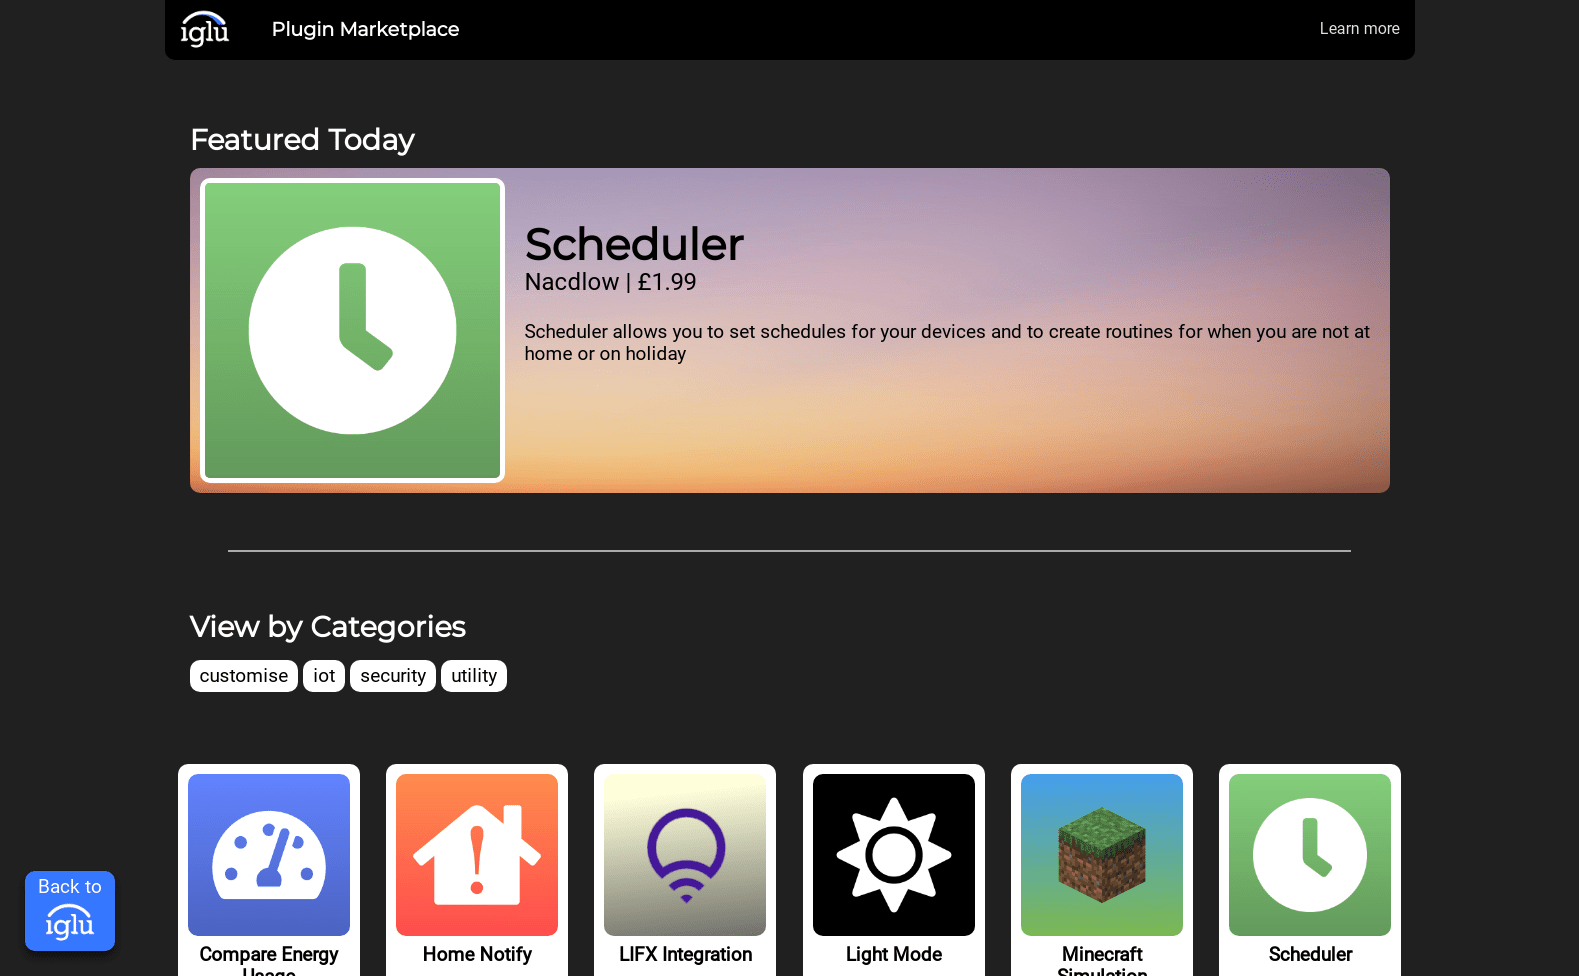 a screenshot of the marketplace, showing the scheduler as the featuredplugin, priced at 1.99 pound sterling, there are options to view plugins bycategory, and a list of plugins